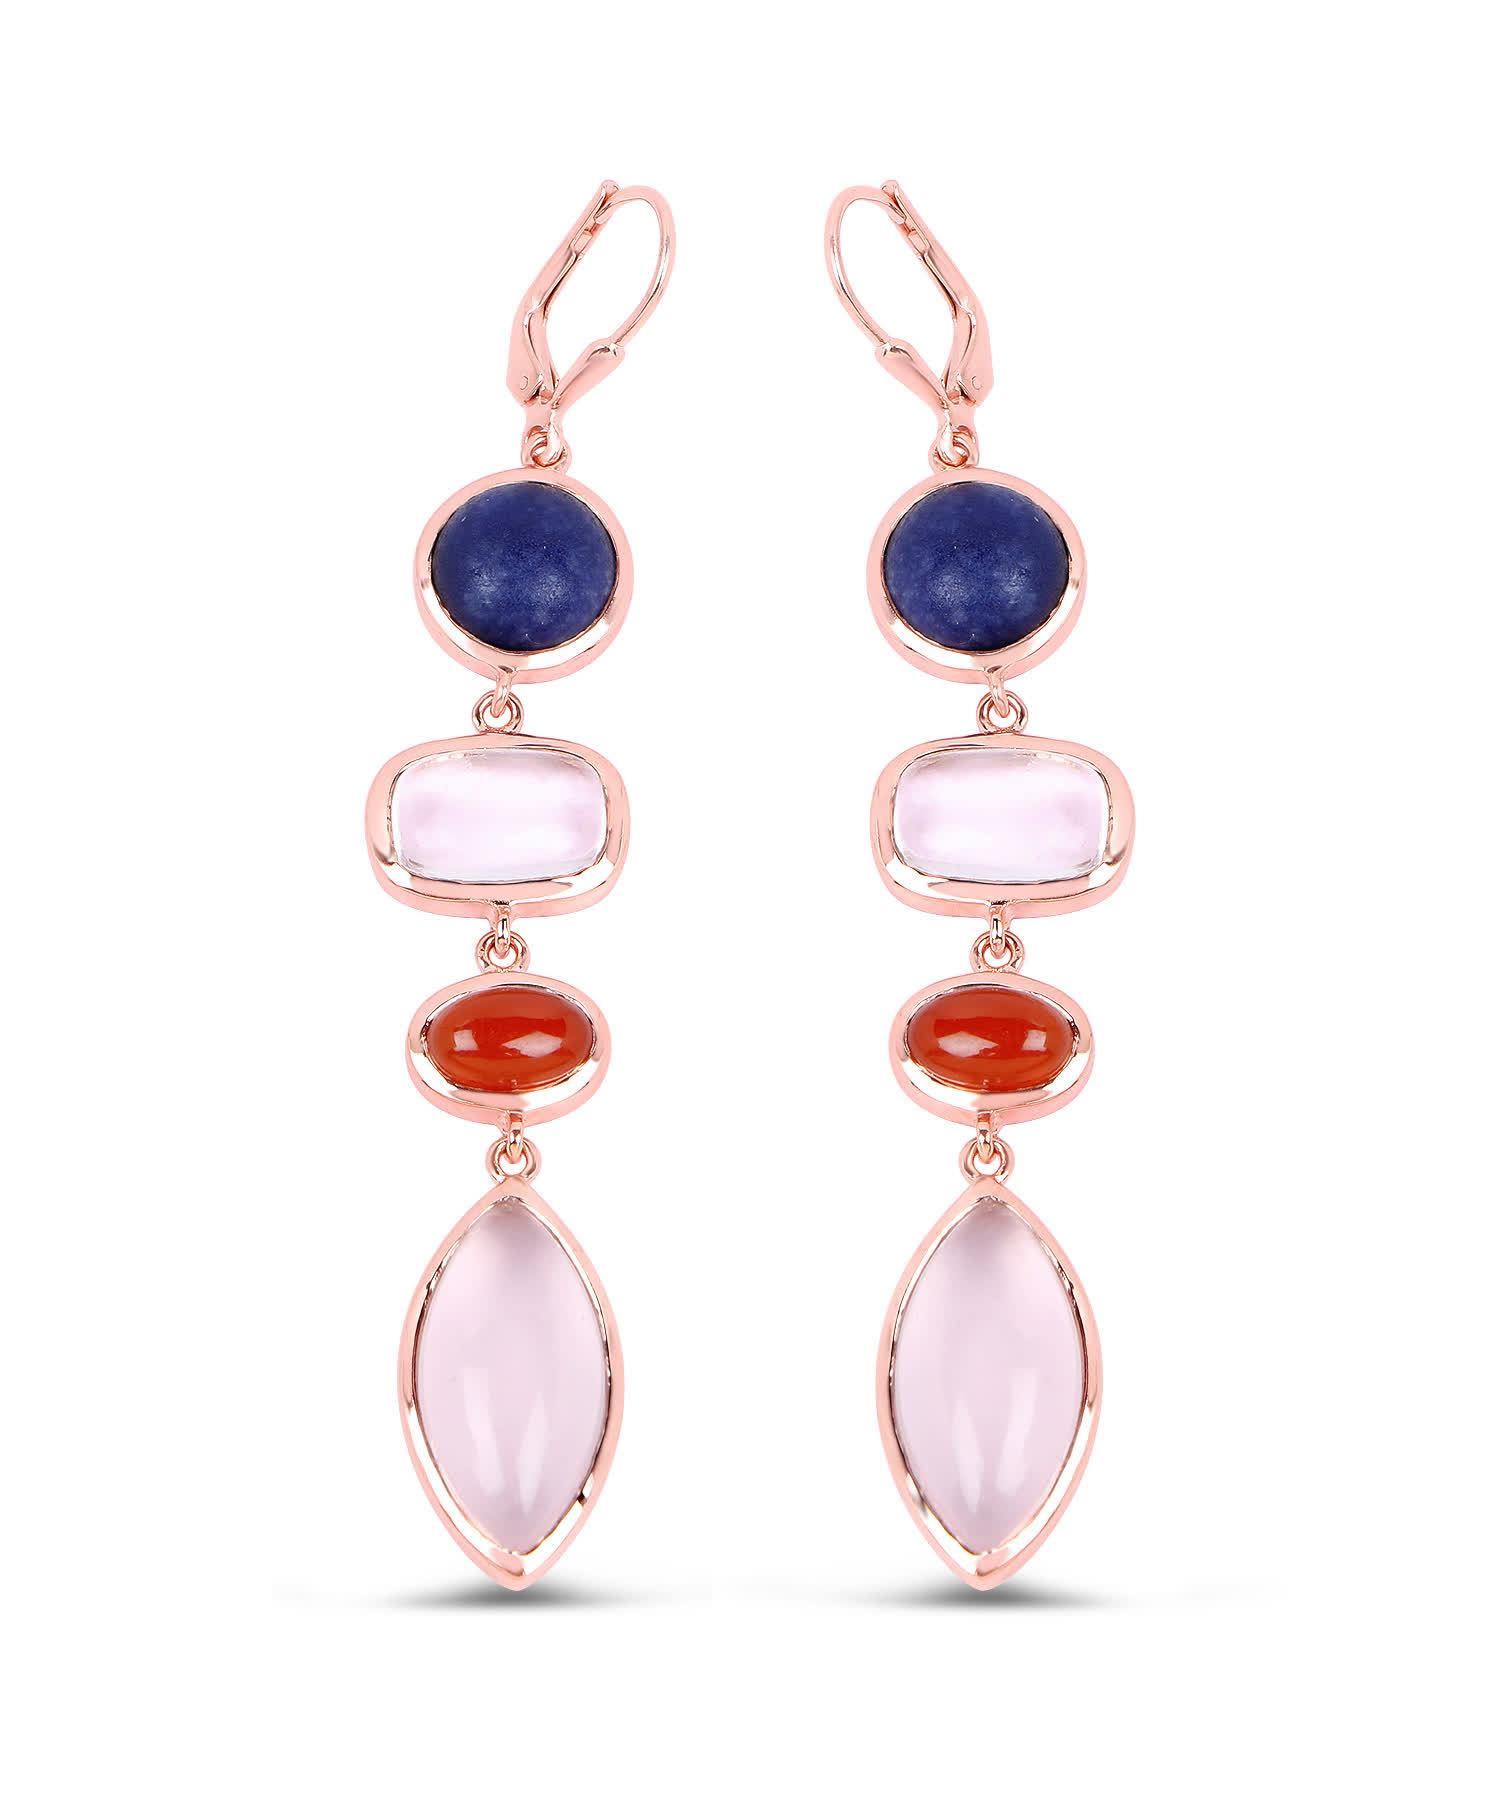 33.94ctw Natural Aventurine, Quartz and Carnelian 14k Gold Plated 925 Sterling Silver Dangle Earrings View 1